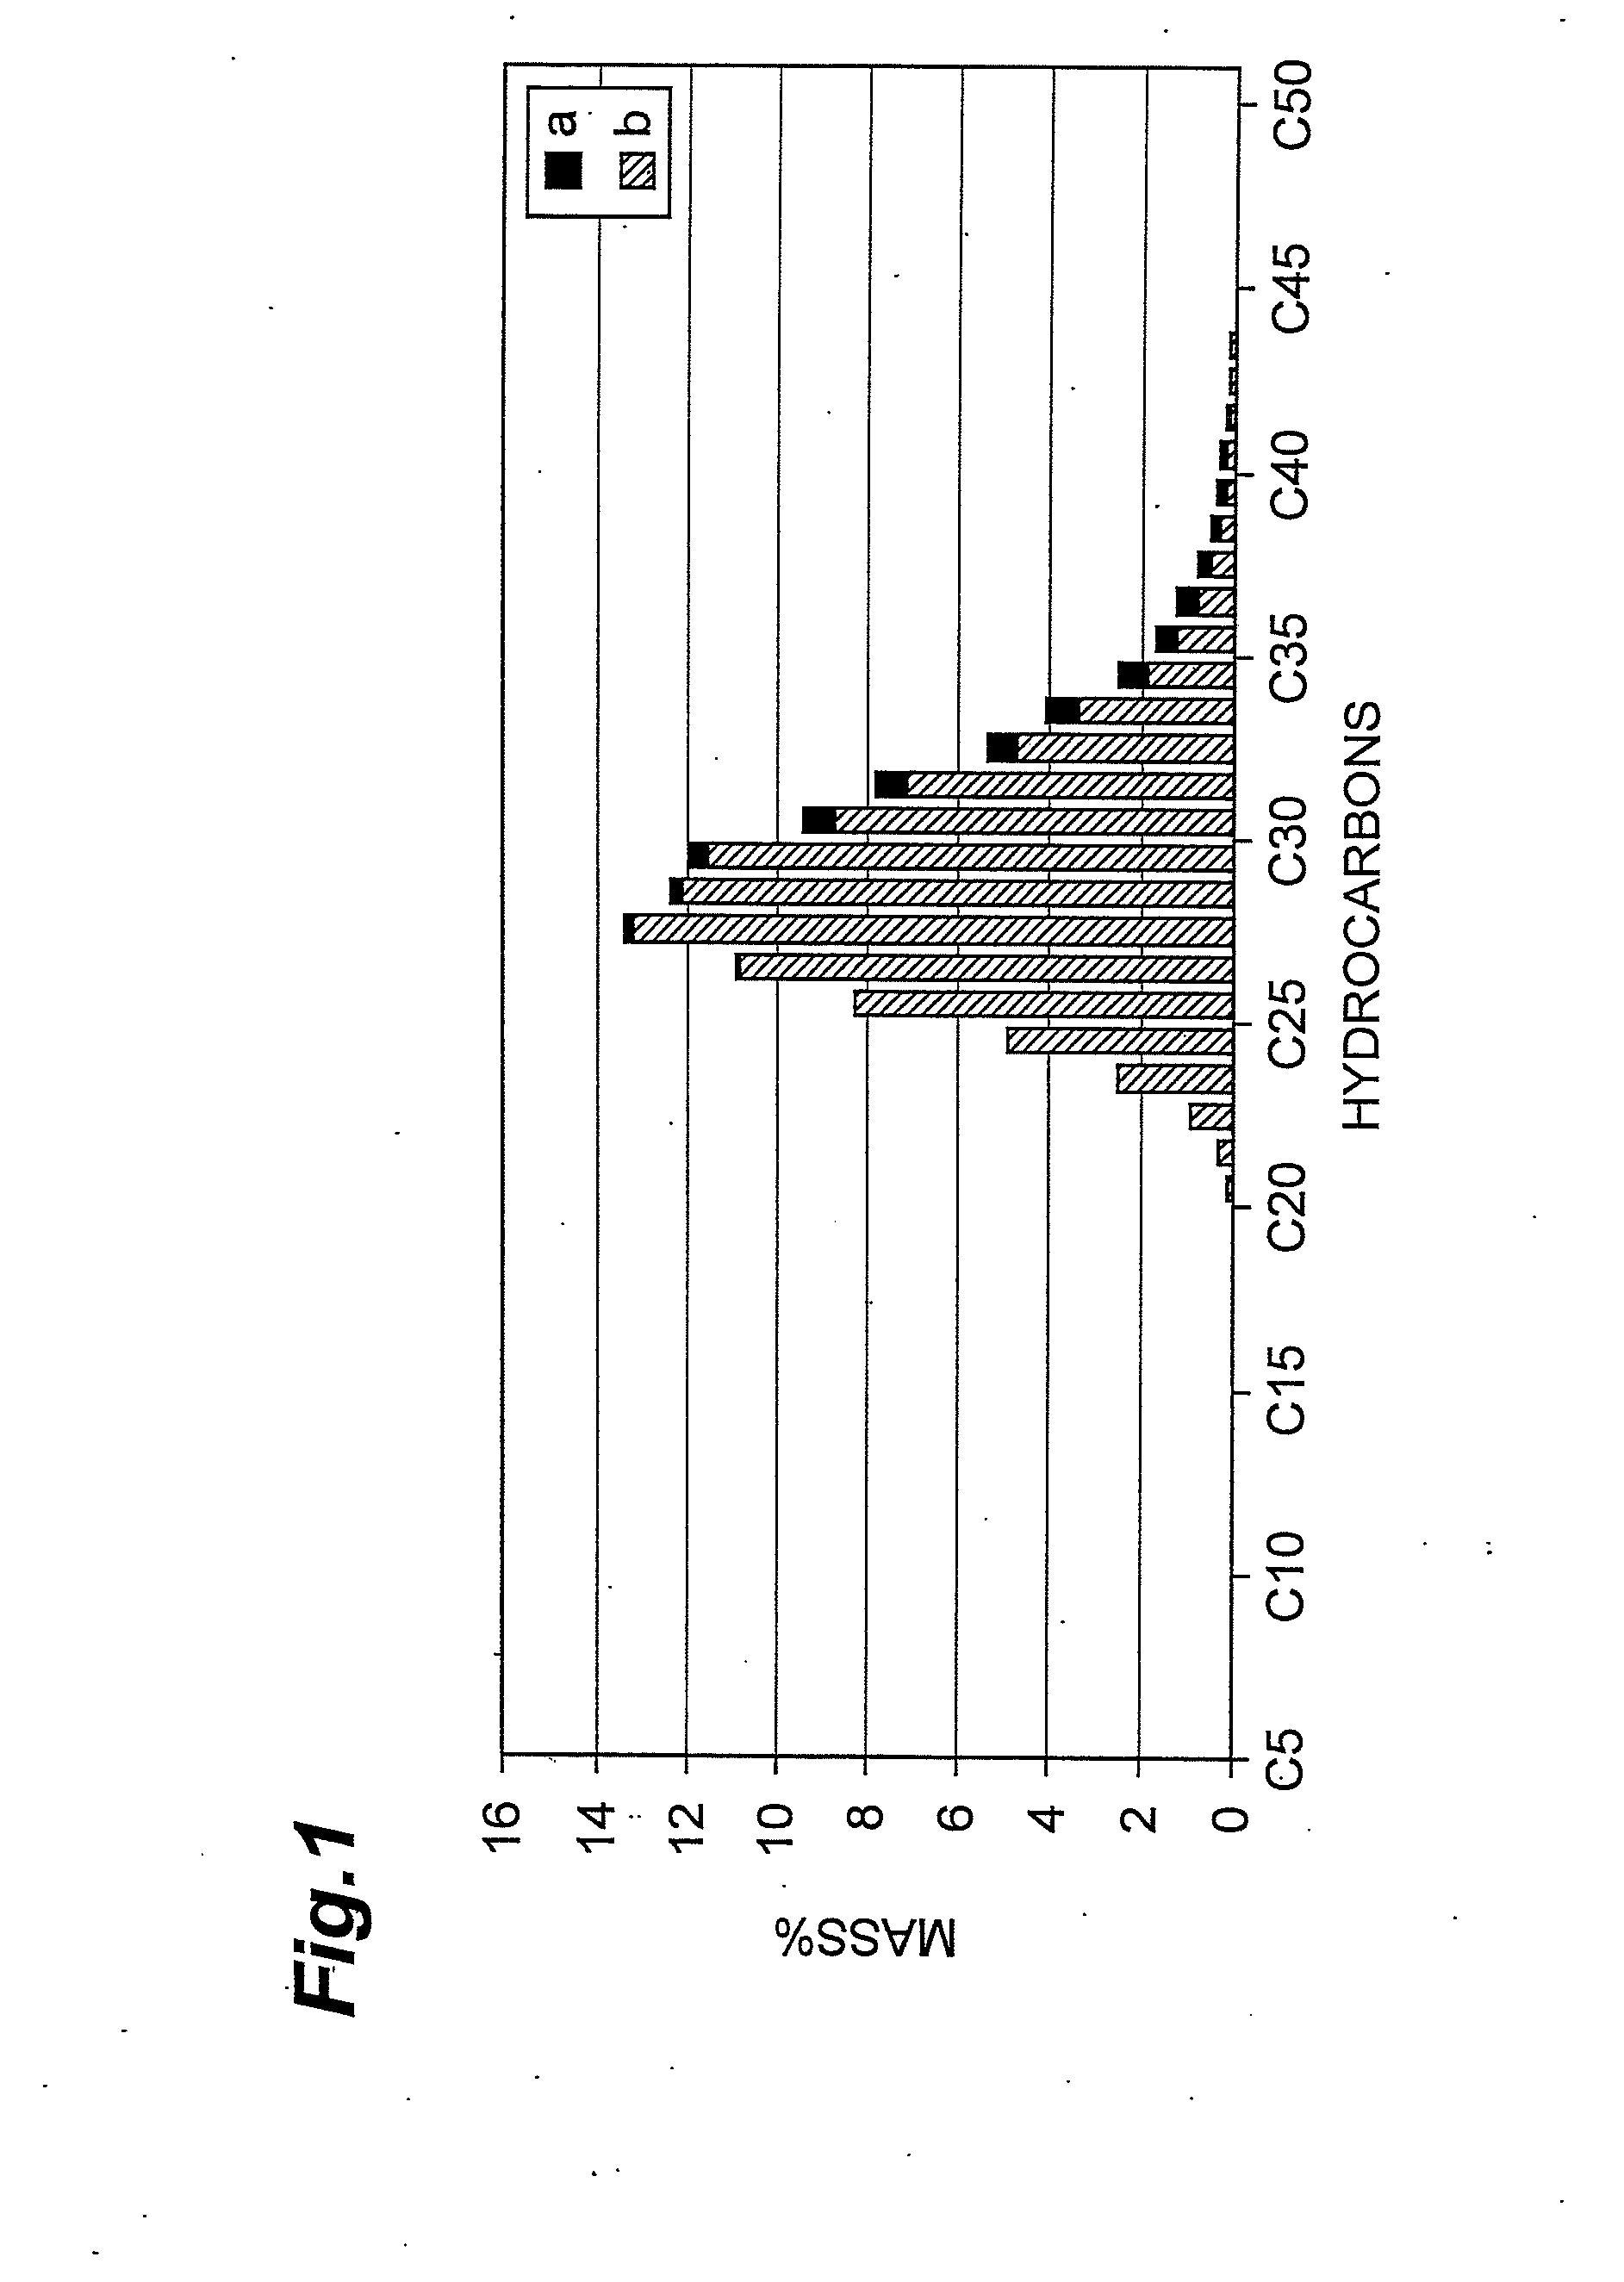 Hydroisomerization catalyst, process for producing the same, method of dewaxing hydrocarbon oil, process for producing hydrocarbon, and process for producing lube base oil